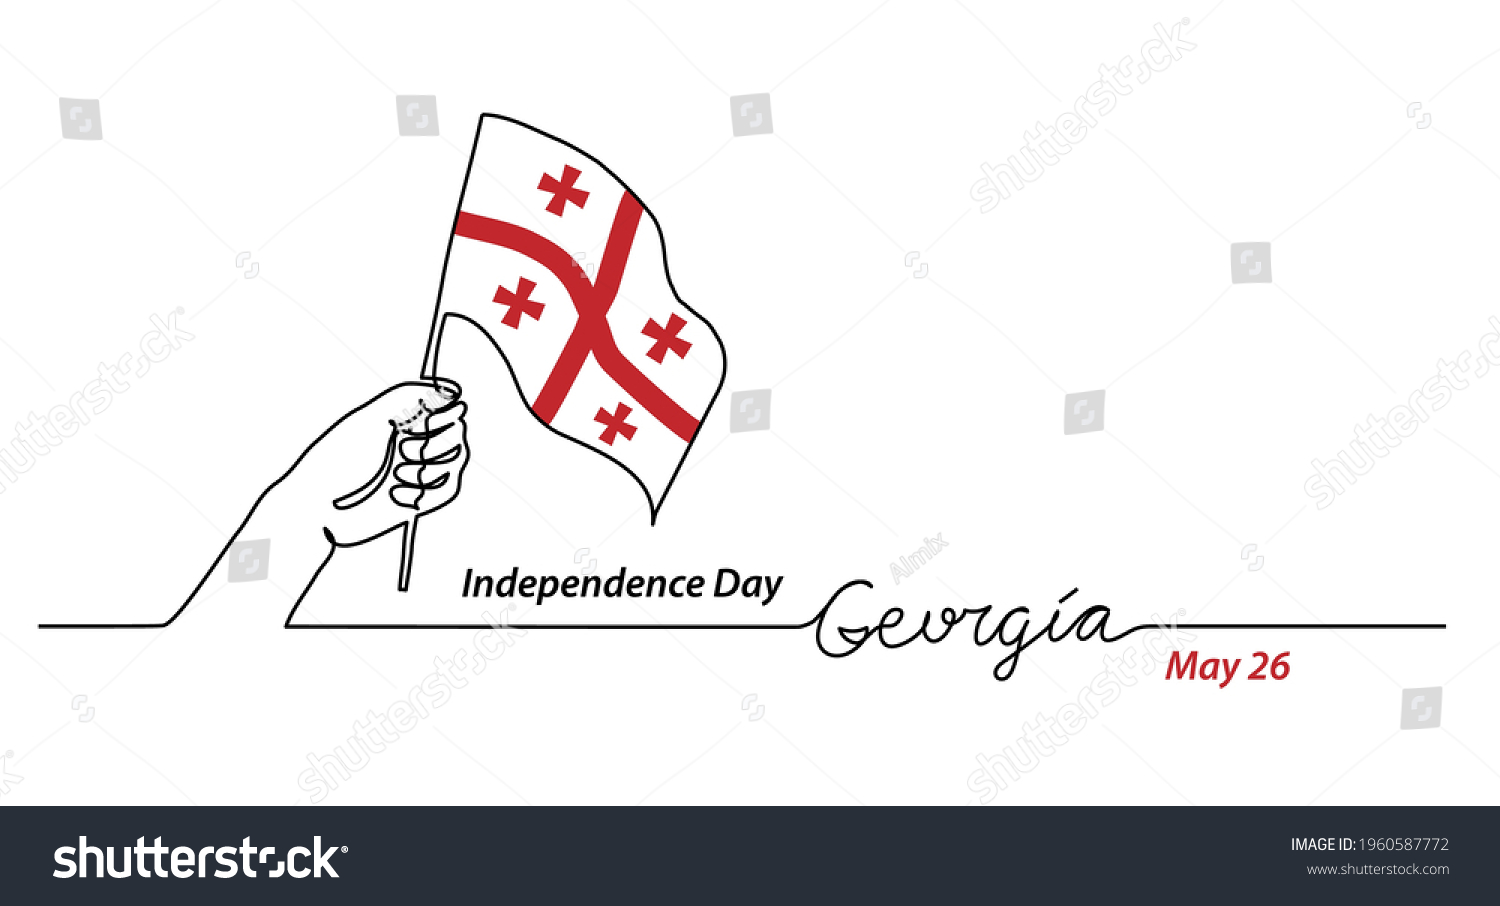 SVG of Georgia flag with hand. Independence day vector banner, background, poster. One continuous line drawing illustration with lettering Georgia. svg